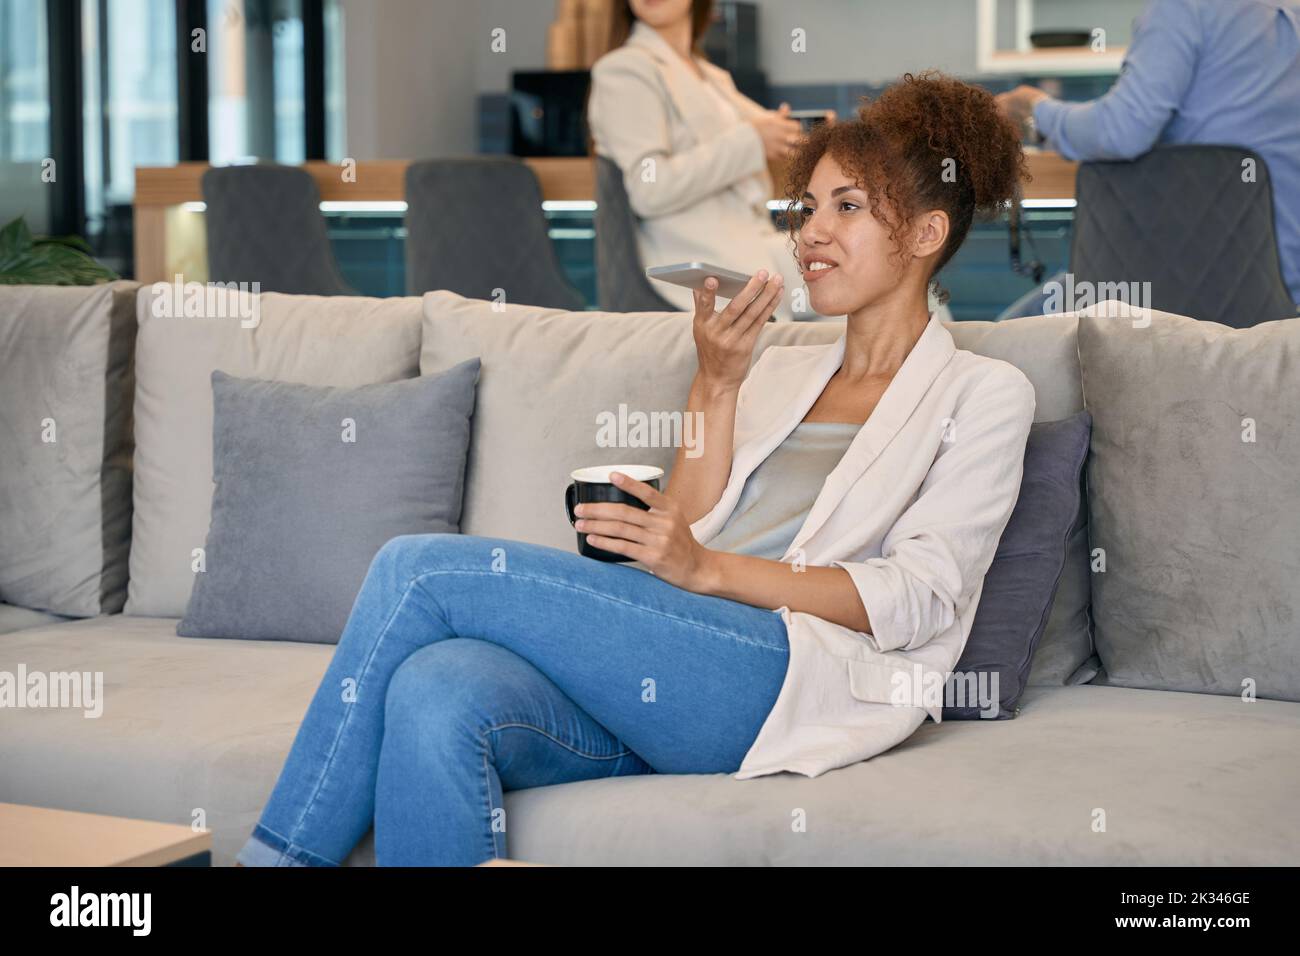 Woman talking on cellphone in co-working space Stock Photo